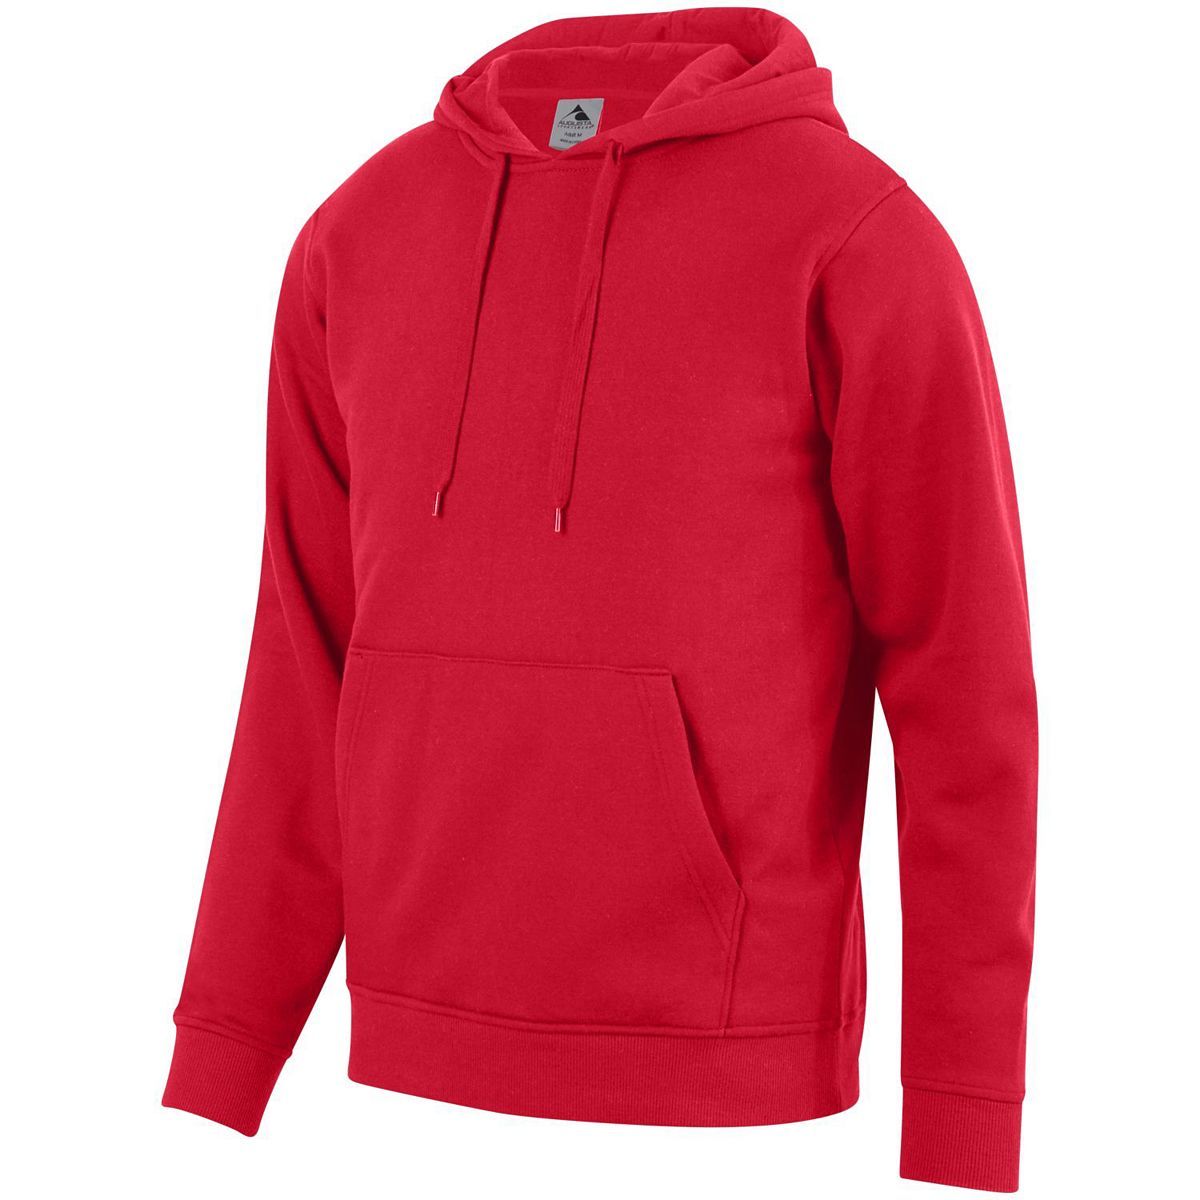 Augusta Sportswear Youth 60/40 Fleece Hoodie in Red  -Part of the Youth, Youth-Hoodie, Hoodies, Augusta-Products product lines at KanaleyCreations.com